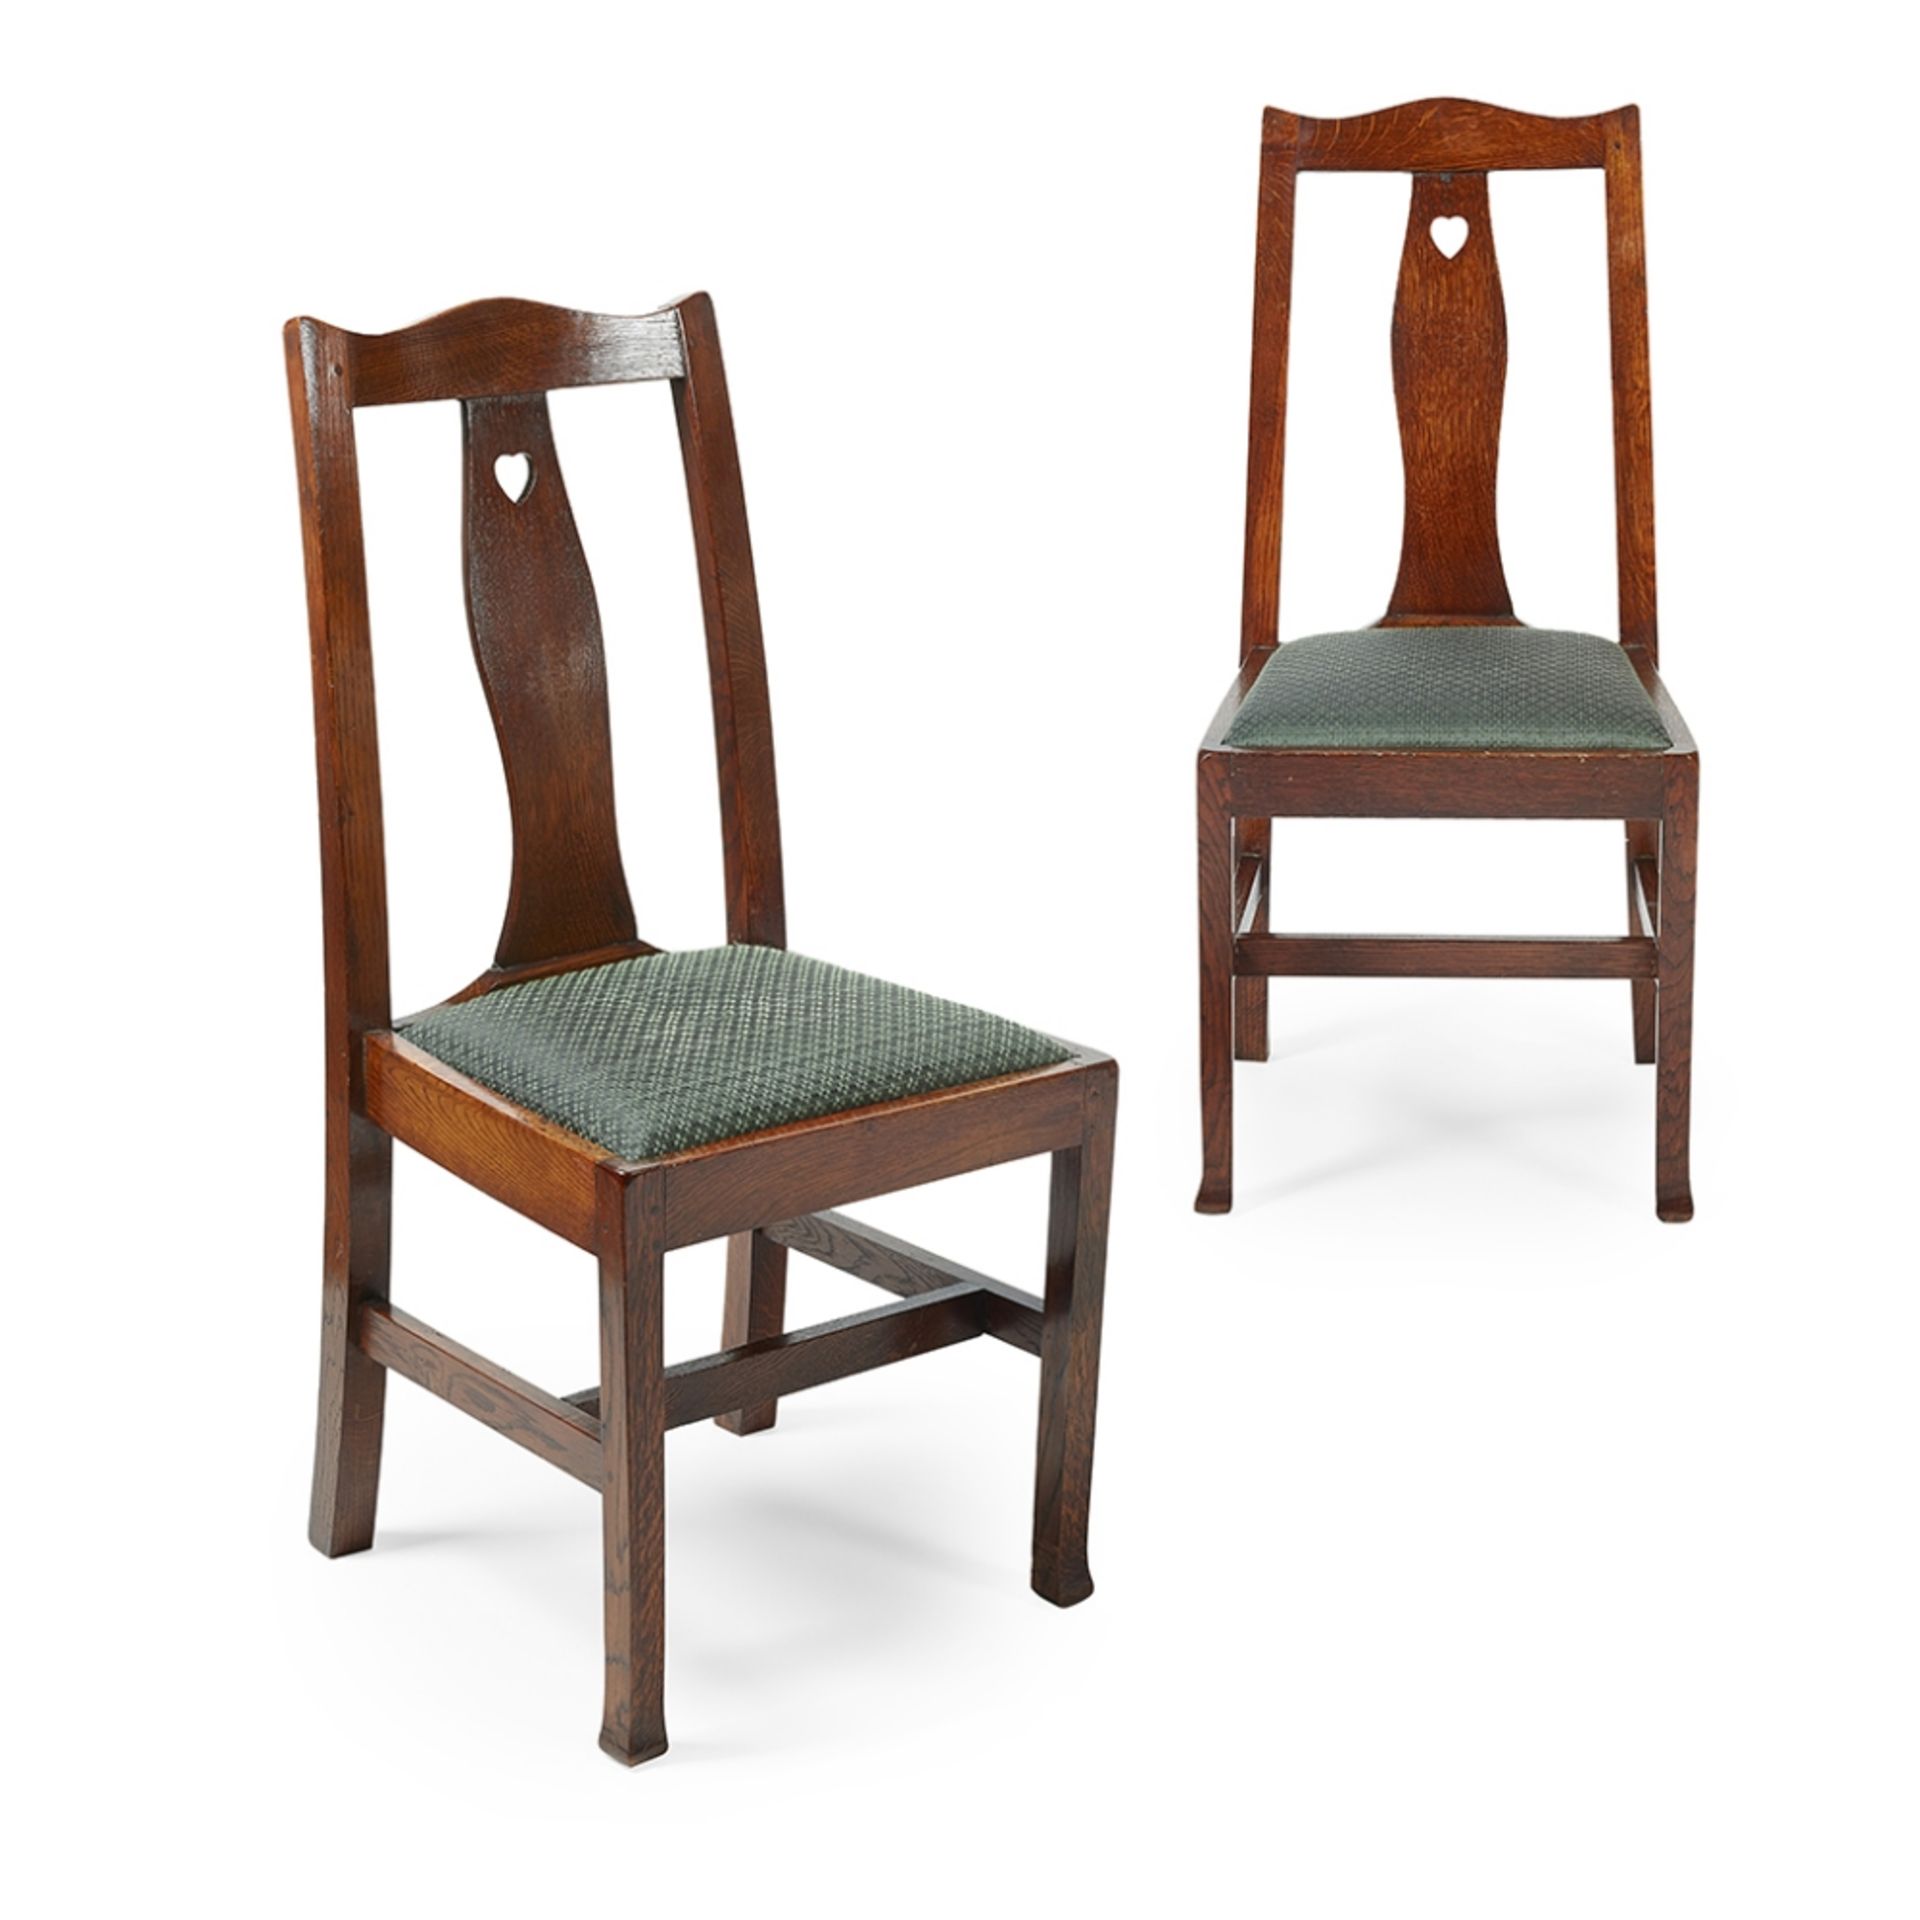 CHARLES ROBERT ASHBEE (1863-1942) PAIR OF ARTS & CRAFTS OAK SIDE CHAIRS, CIRCA 1900 each with